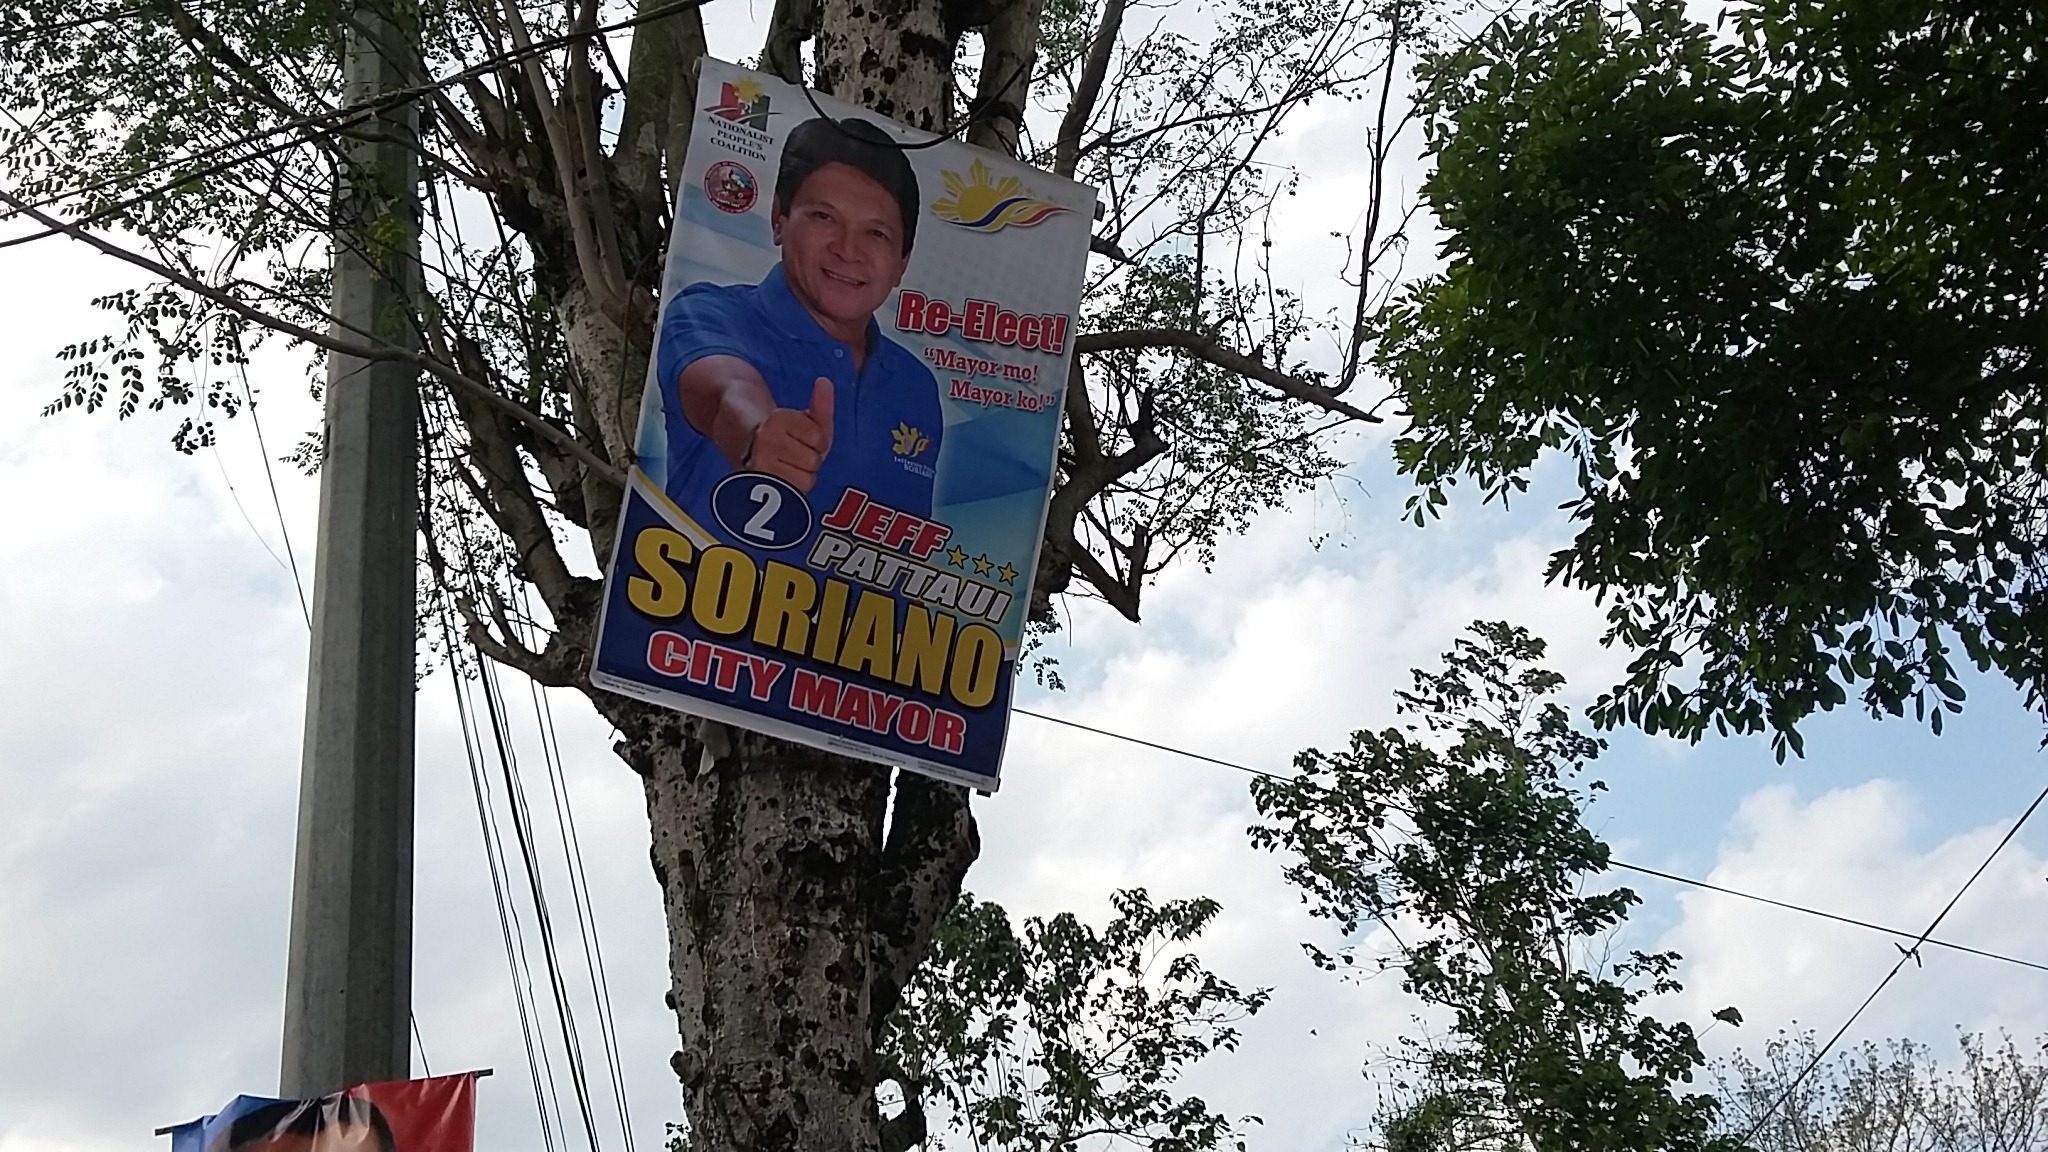 Jefferson Soriano won two consecutive mayoral races in the Ting stronghold of Tuguegarao City. File photo by Raymon Dullana/Rappler 